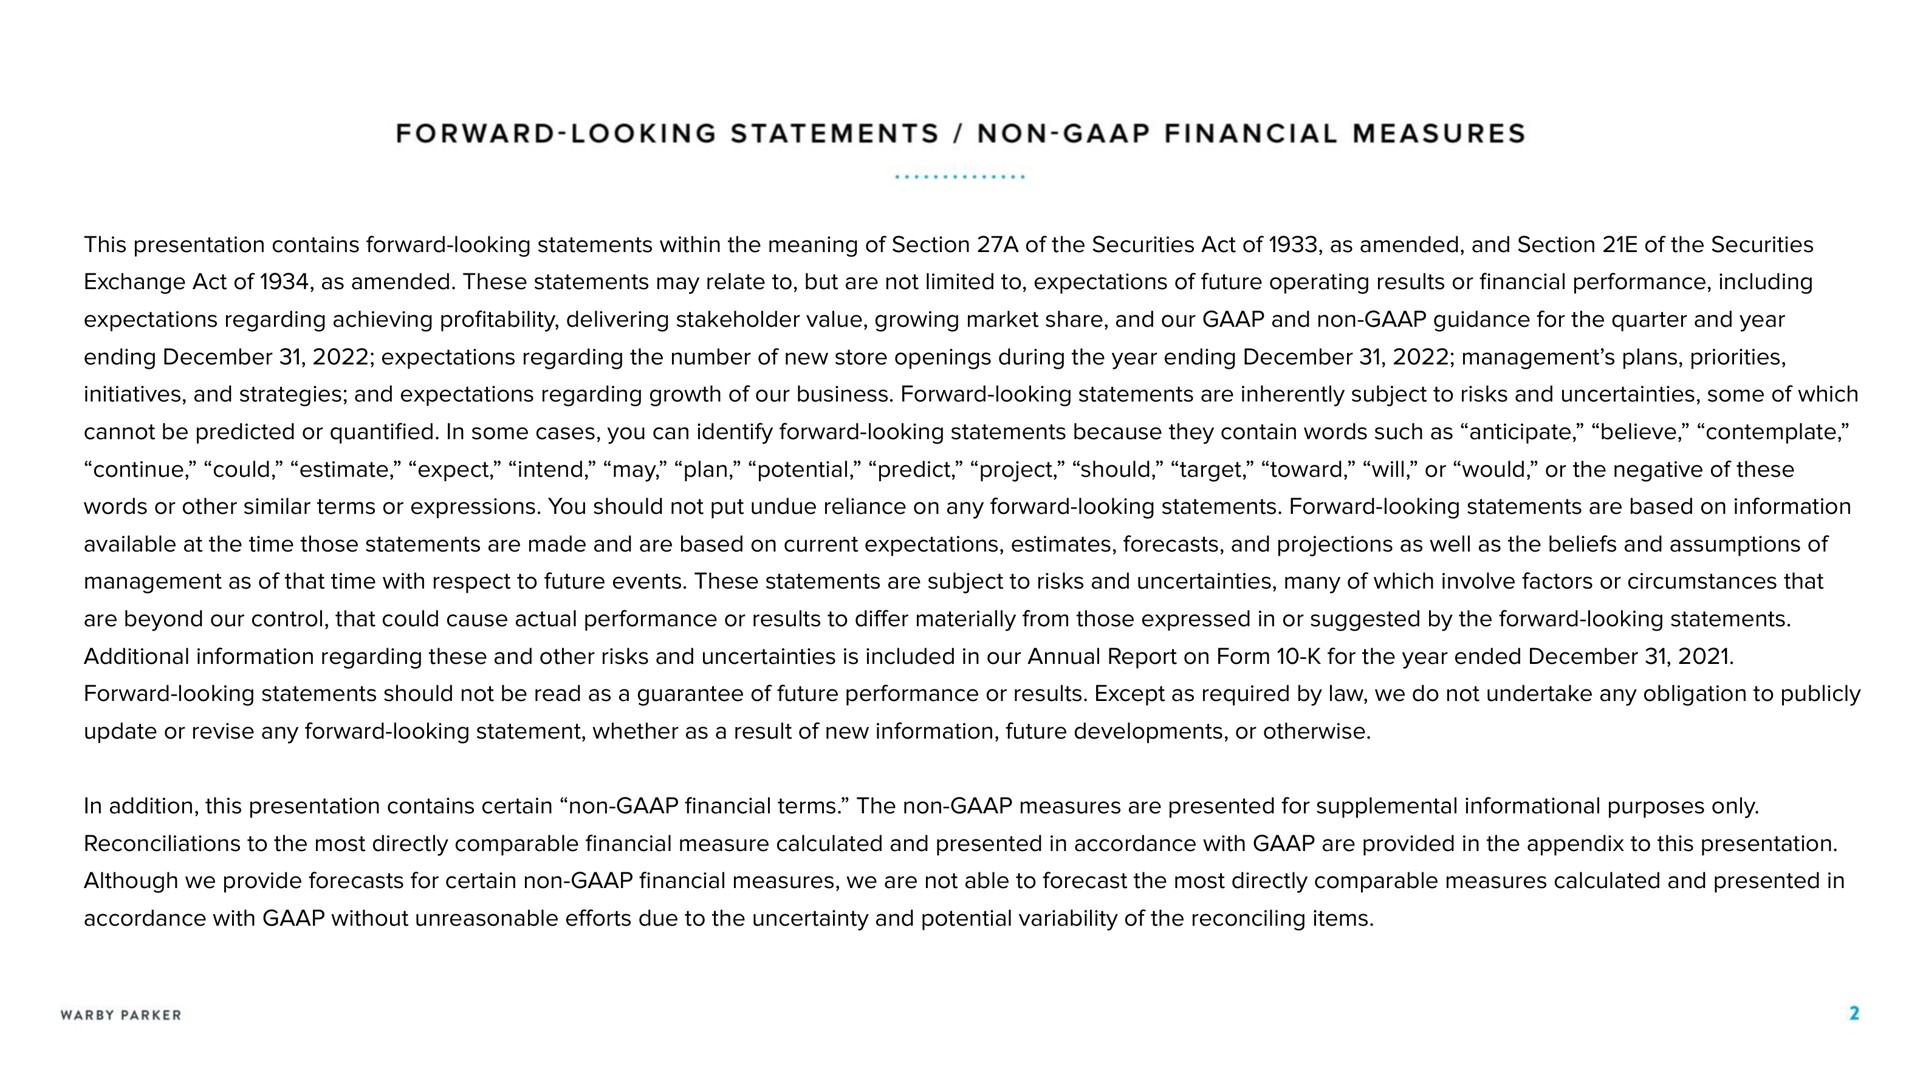 forward looking statements non financial measures this presentation contains forward looking statements within the meaning of section a of the securities act of as amended and section of the securities exchange act of as amended these statements may relate to but are not limited to expectations of future operating results or financial performance including expectations regarding achieving profitability delivering stakeholder value growing market share and our and non guidance for the quarter and year ending expectations regarding the number of new store openings during the year ending management plans priorities initiatives and strategies and expectations regarding growth of our business forward looking statements are inherently subject to risks and uncertainties some of which cannot be predicted or quantified in some cases you can identify forward looking statements because they contain words such as anticipate believe contemplate continue could estimate expect intend may plan potential predict project should target toward will or would or the negative of these words or other similar terms or expressions you should not put undue reliance on any forward looking statements forward looking statements are based on information available at the time those statements are made and are based on current expectations estimates forecasts and projections as well as the beliefs and assumptions of management as of that time with respect to future events these statements are subject to risks and uncertainties many of which involve factors or circumstances that are beyond our control that could cause actual performance or results to differ materially from those expressed in or suggested by the forward looking statements additional information regarding these and other risks and uncertainties is included in our annual report on form for the year ended forward looking statements should not be read as a guarantee of future performance or results except as required by law we do not undertake any obligation to publicly update or revise any forward looking statement whether as a result of new information future developments or otherwise in addition this presentation contains certain non financial terms the non measures are presented for supplemental informational purposes only reconciliations to the most directly comparable financial measure calculated and presented in accordance with are provided in the appendix to this presentation although we provide forecasts for certain non financial measures we are not able to forecast the most directly comparable measures calculated and presented in accordance with without unreasonable efforts due to the uncertainty and potential variability of the reconciling items | Warby Parker